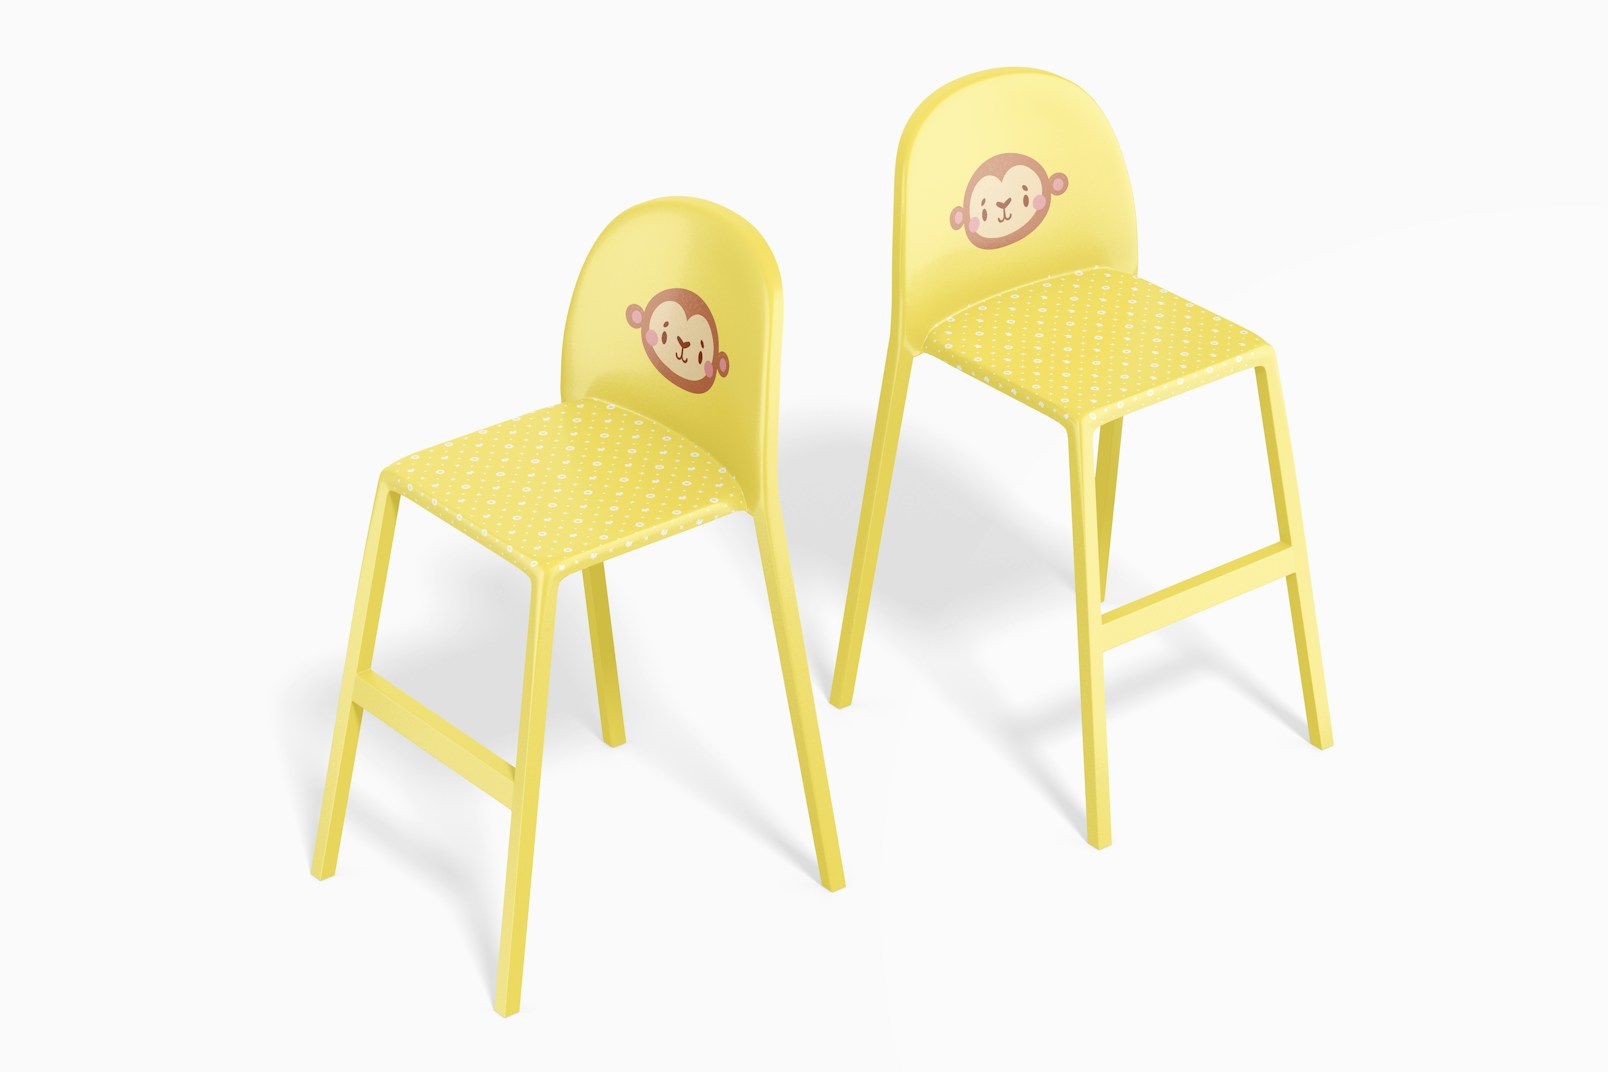 Plastic High Chairs for Kids Mockup, Top View